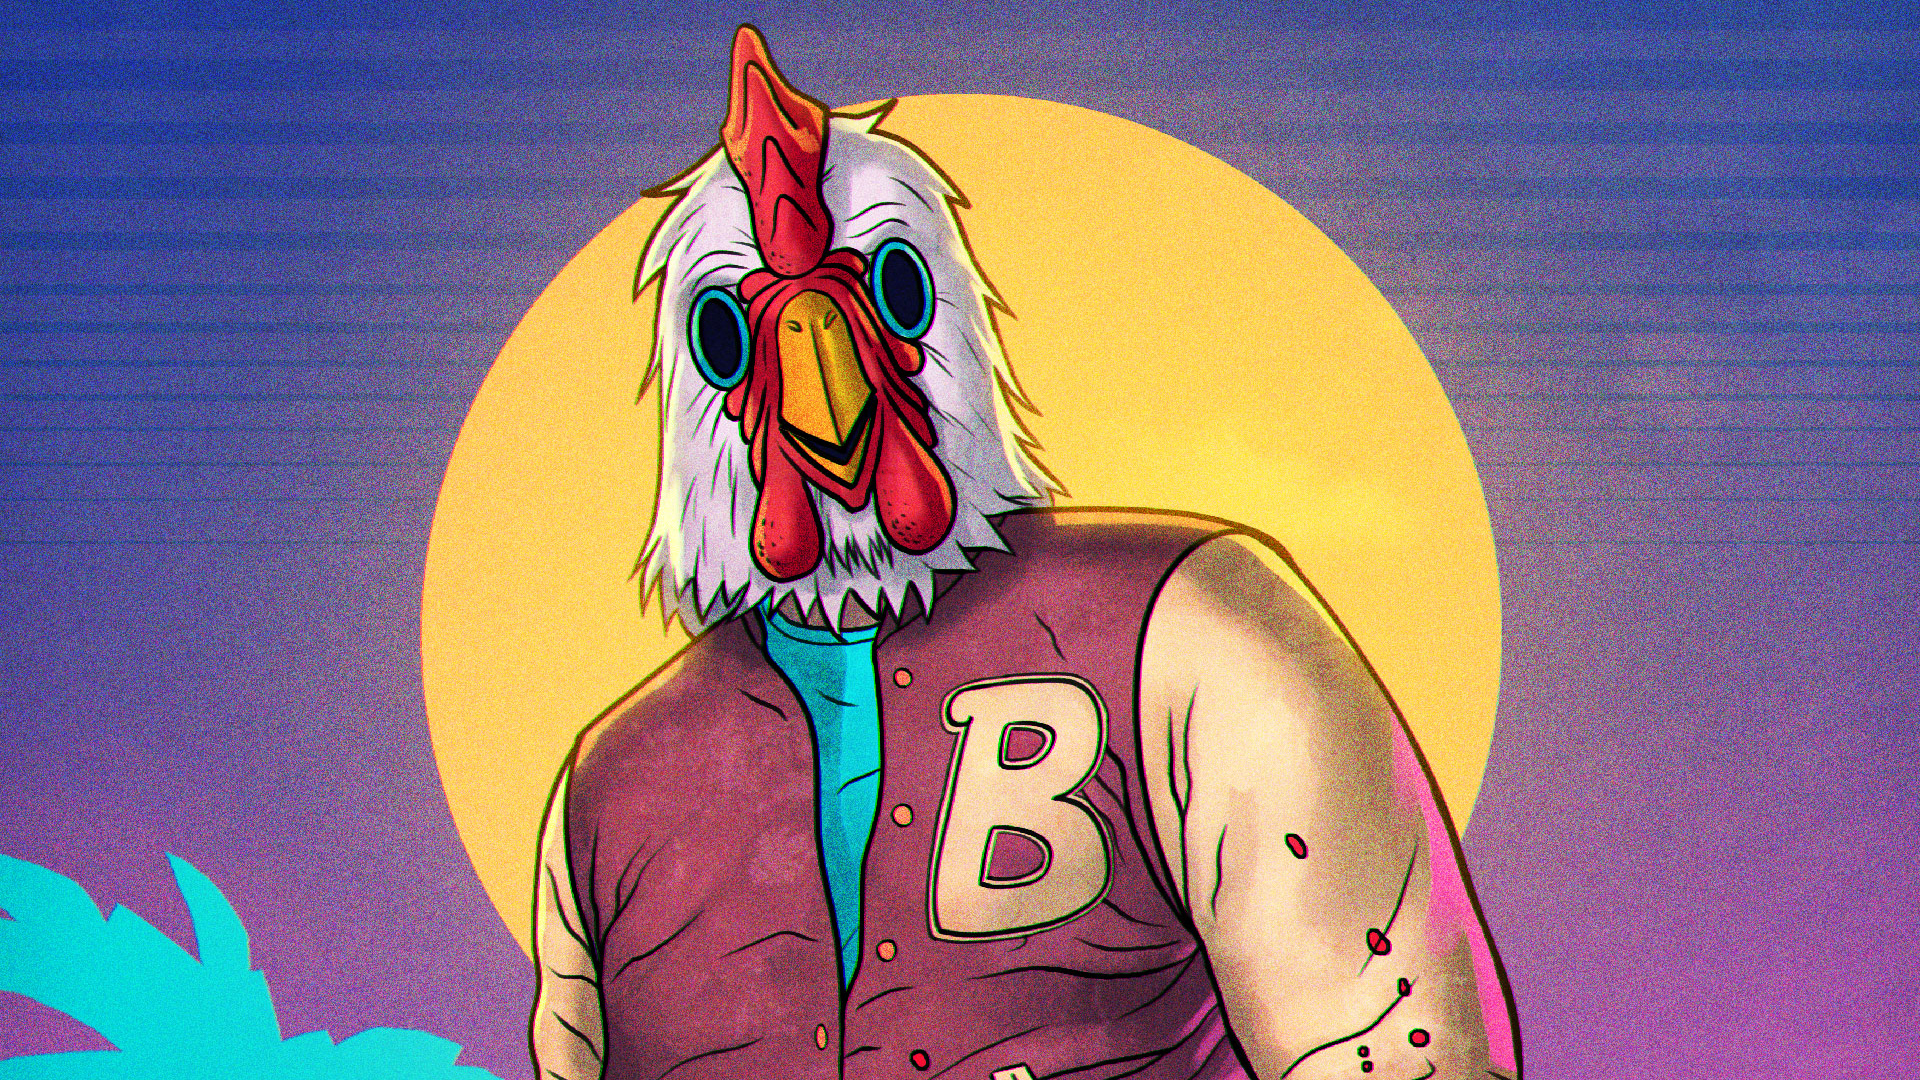 hotline miami 2: wrong number, video game, hotline miami